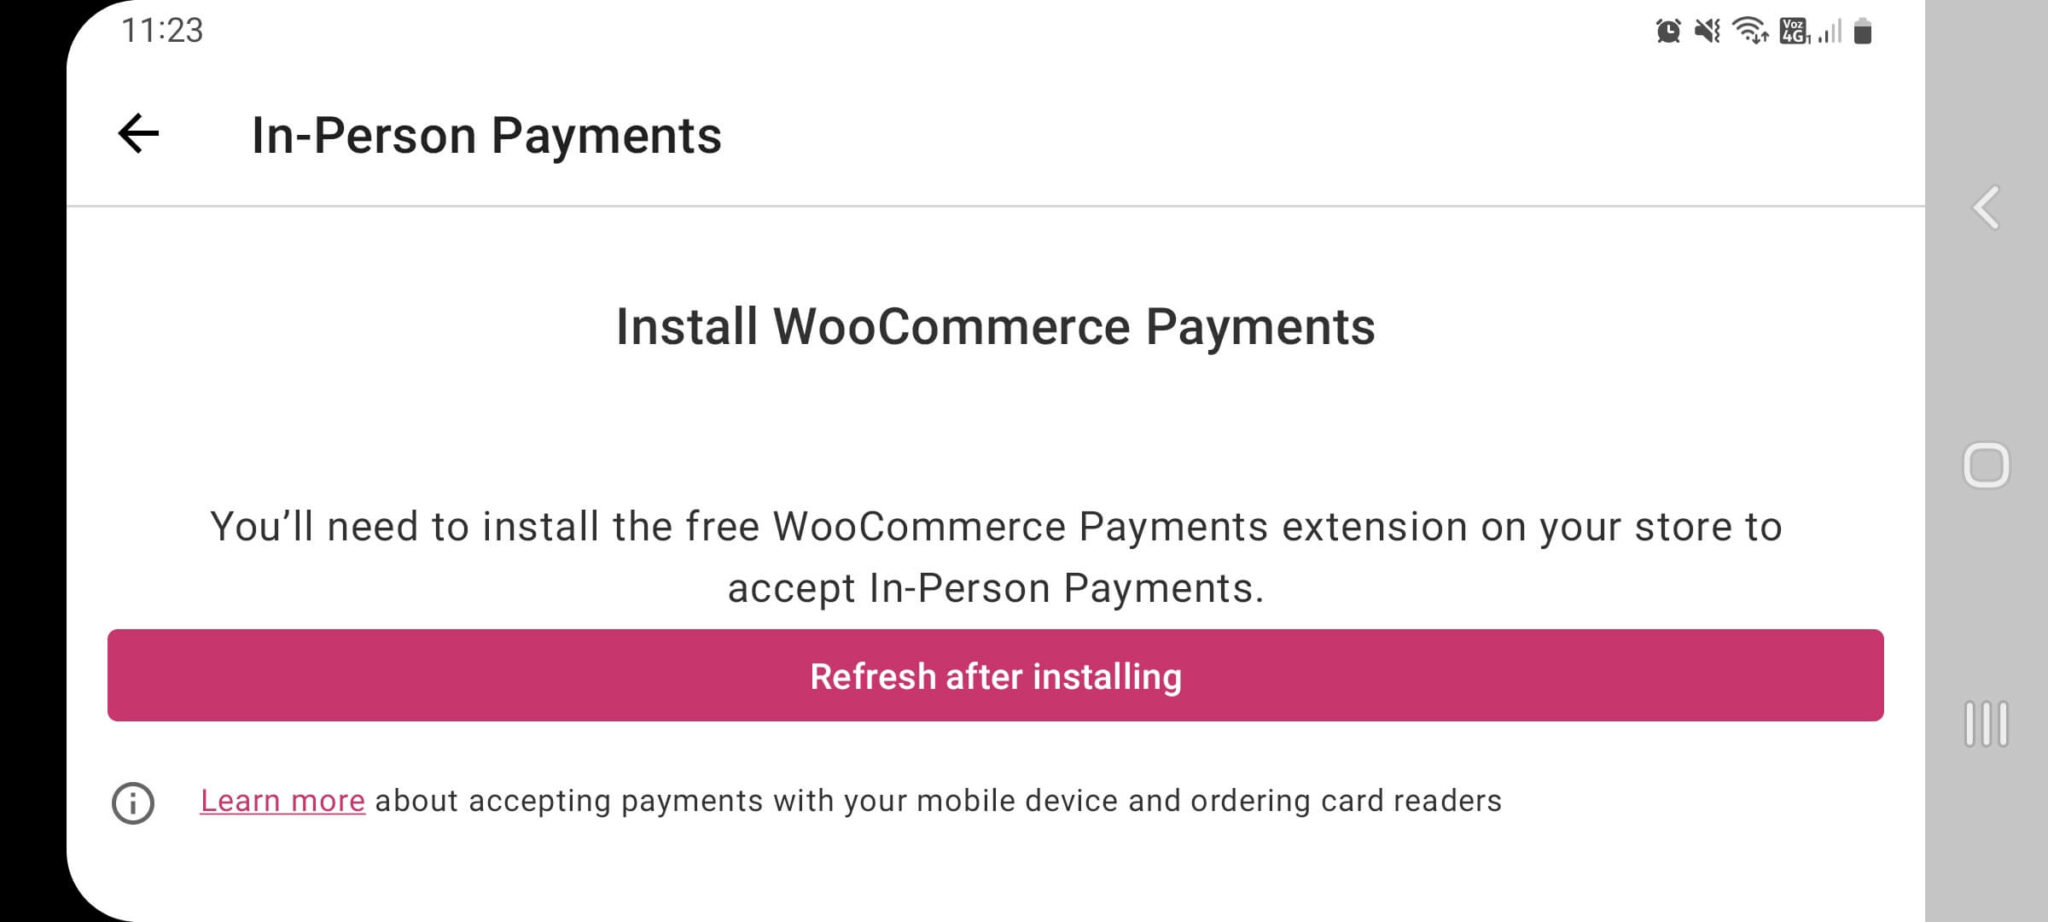 Enabling WooCommerce Payments for your store